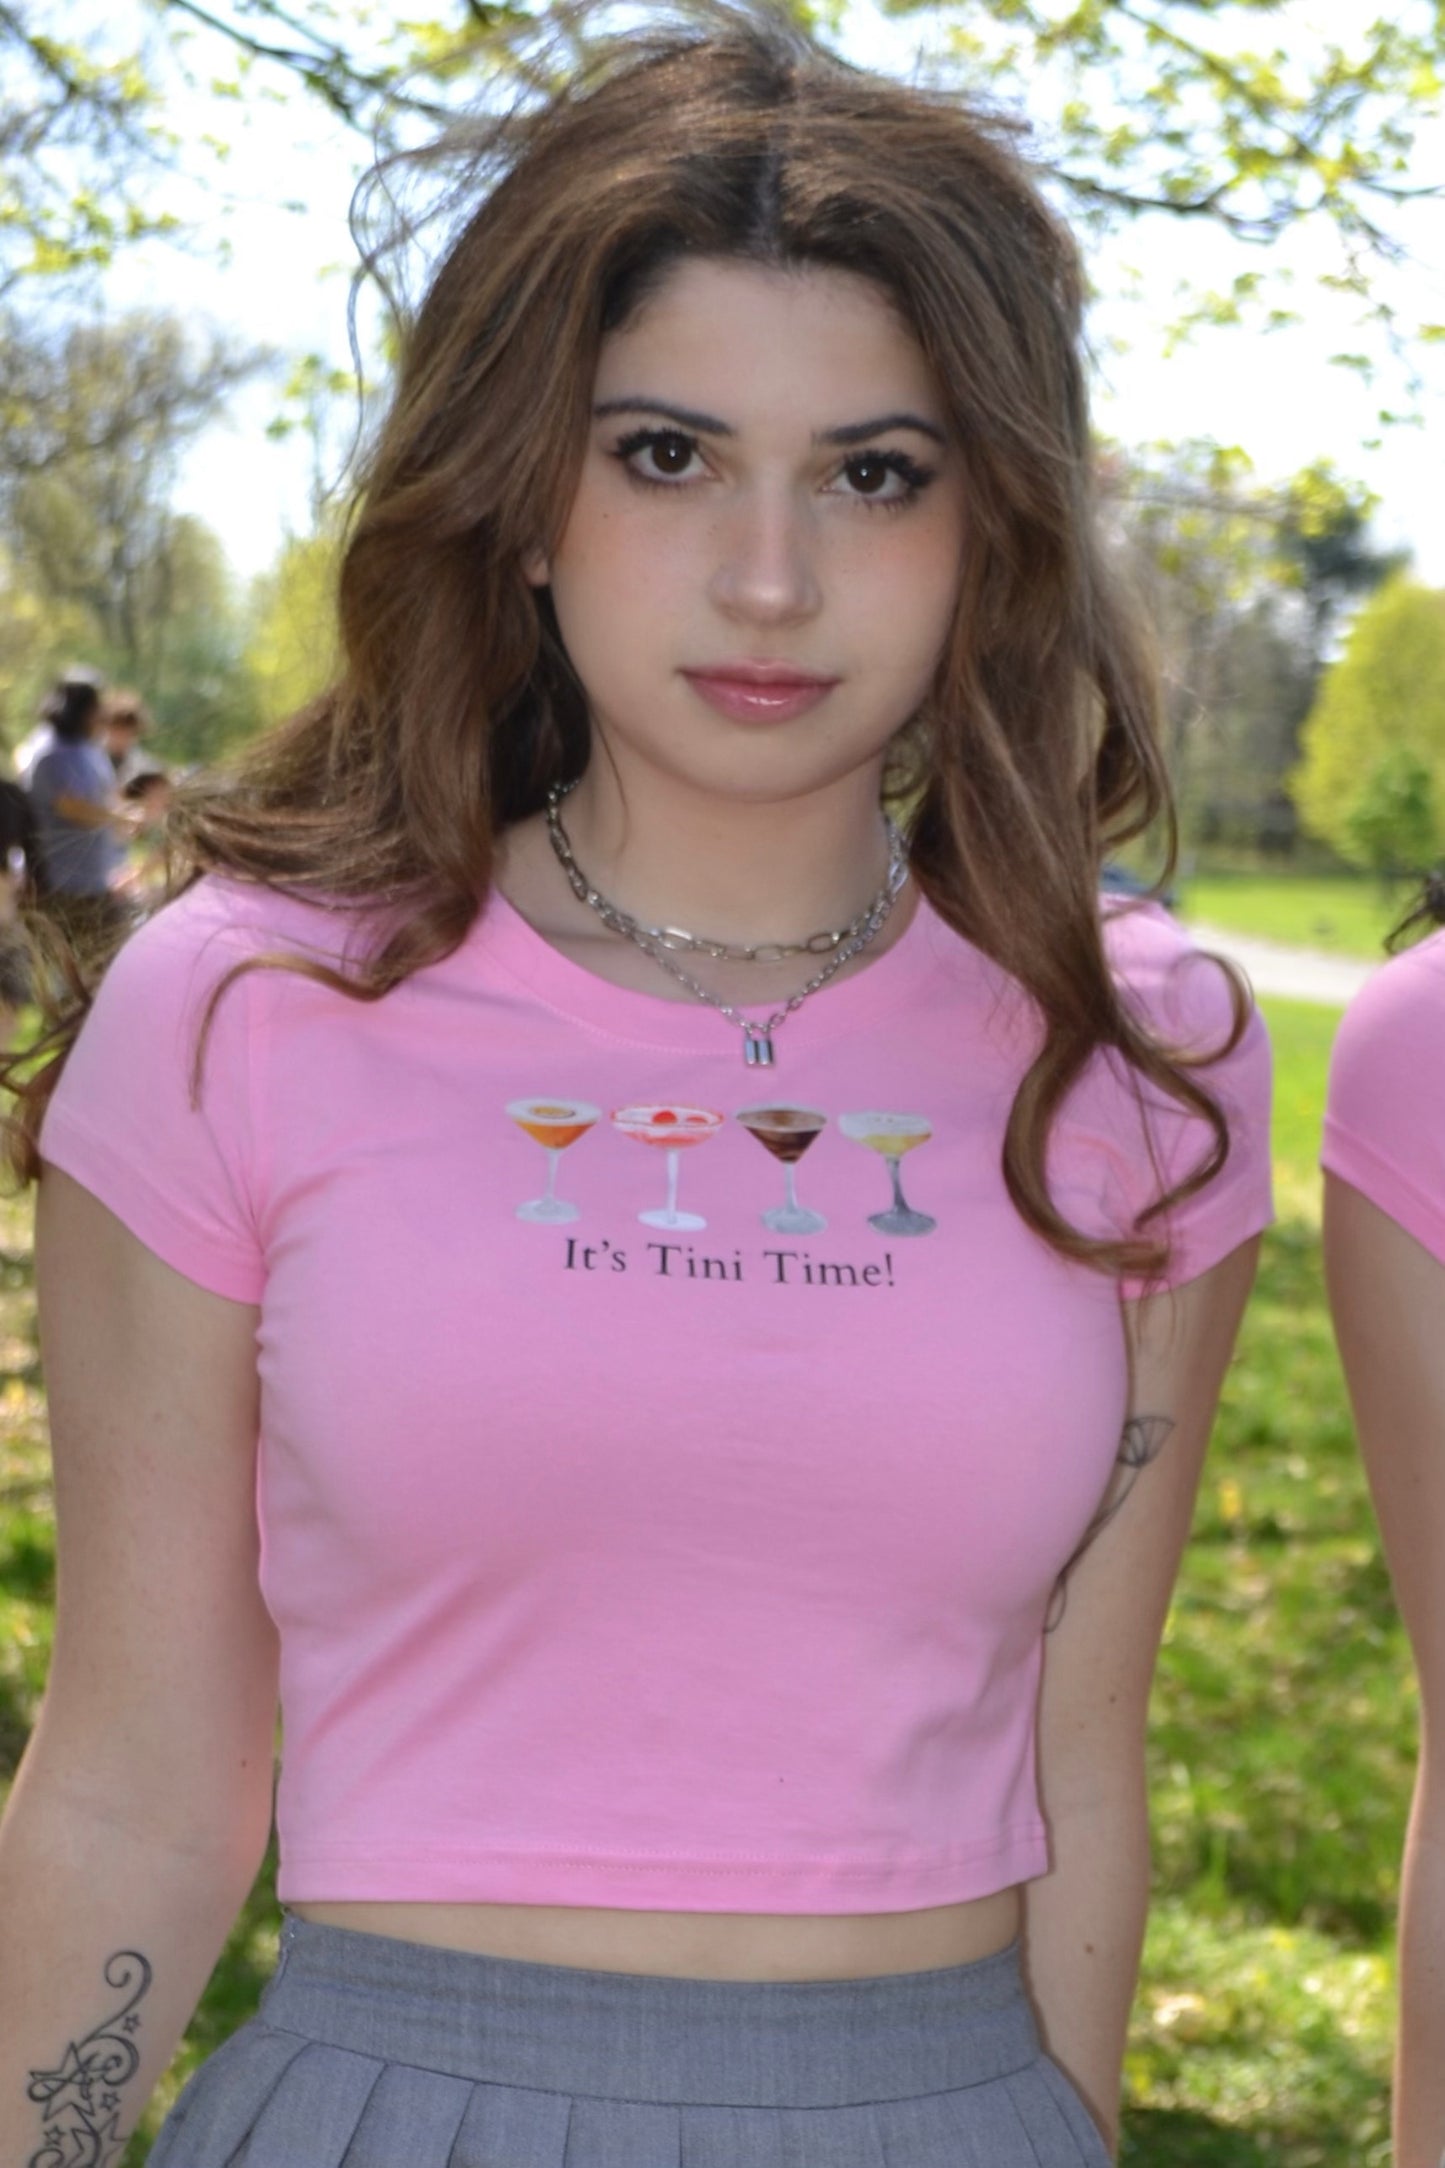 a woman in a pink shirt and a gray skirt